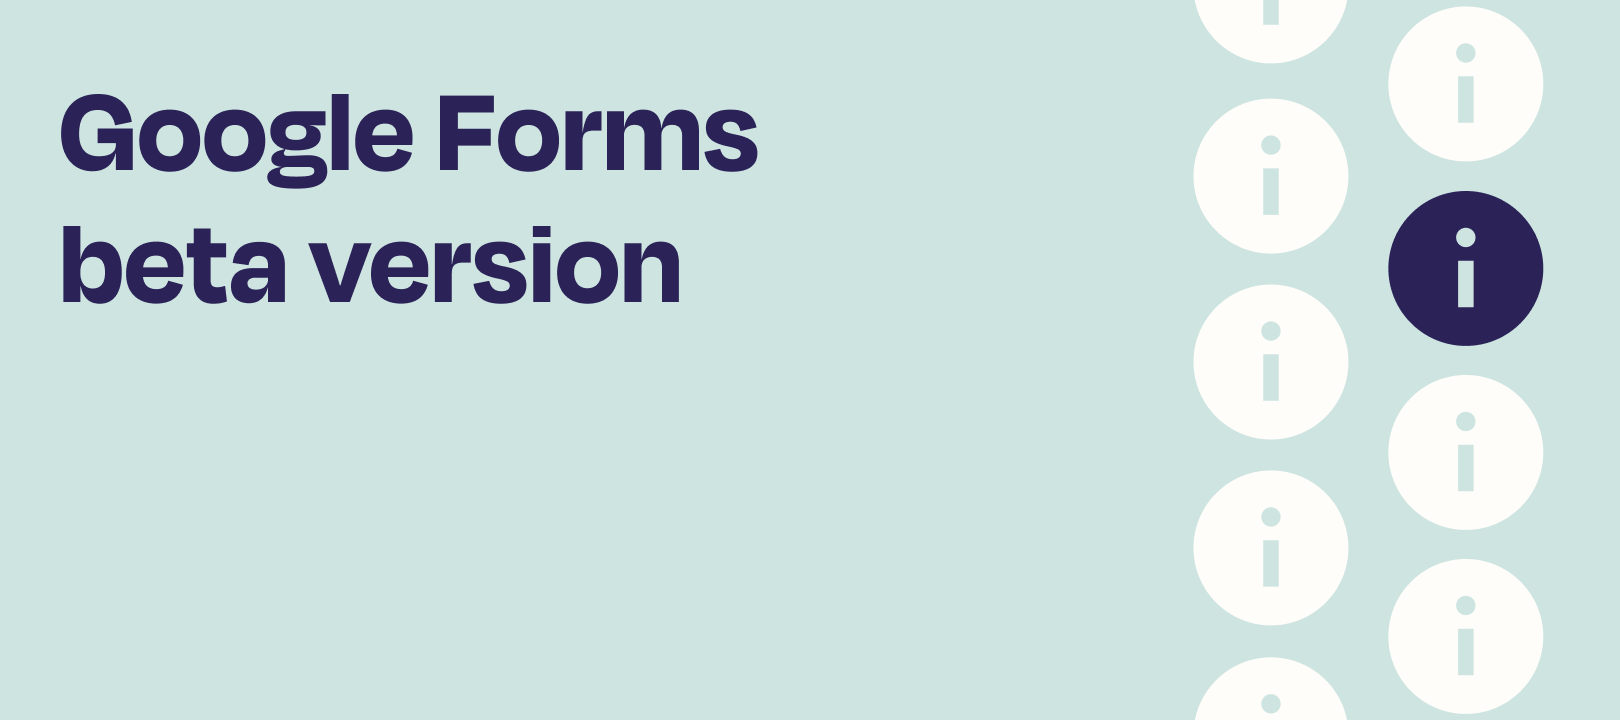 We're launching a new Google Forms integration